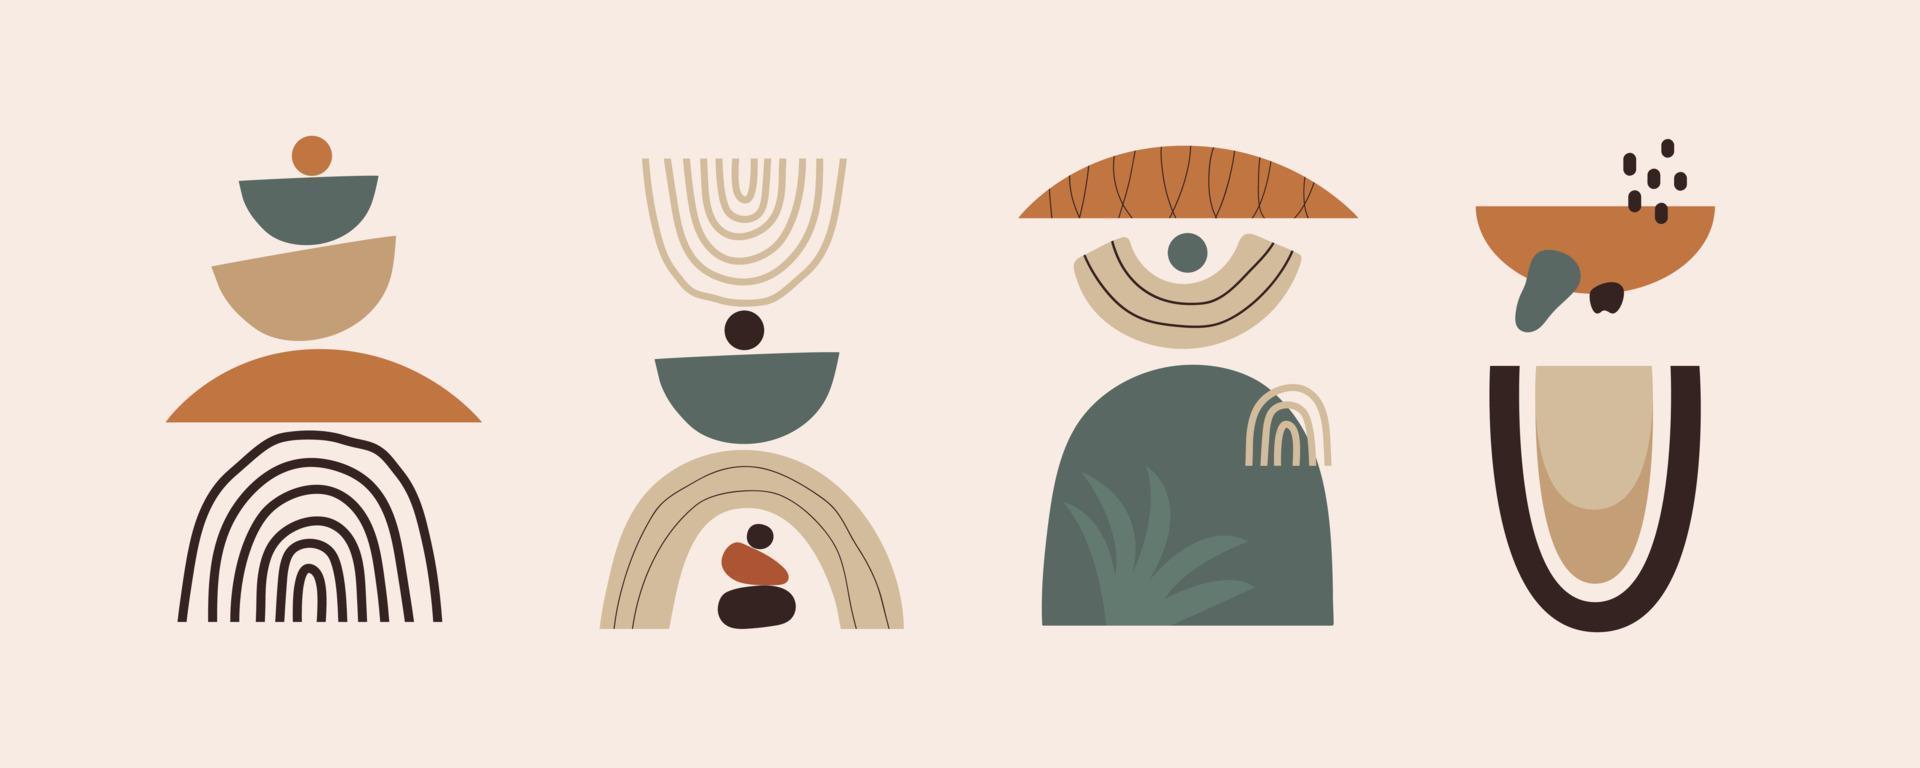 A series of four abstract illustrations in muted tones of green, brown and orange. - Balance